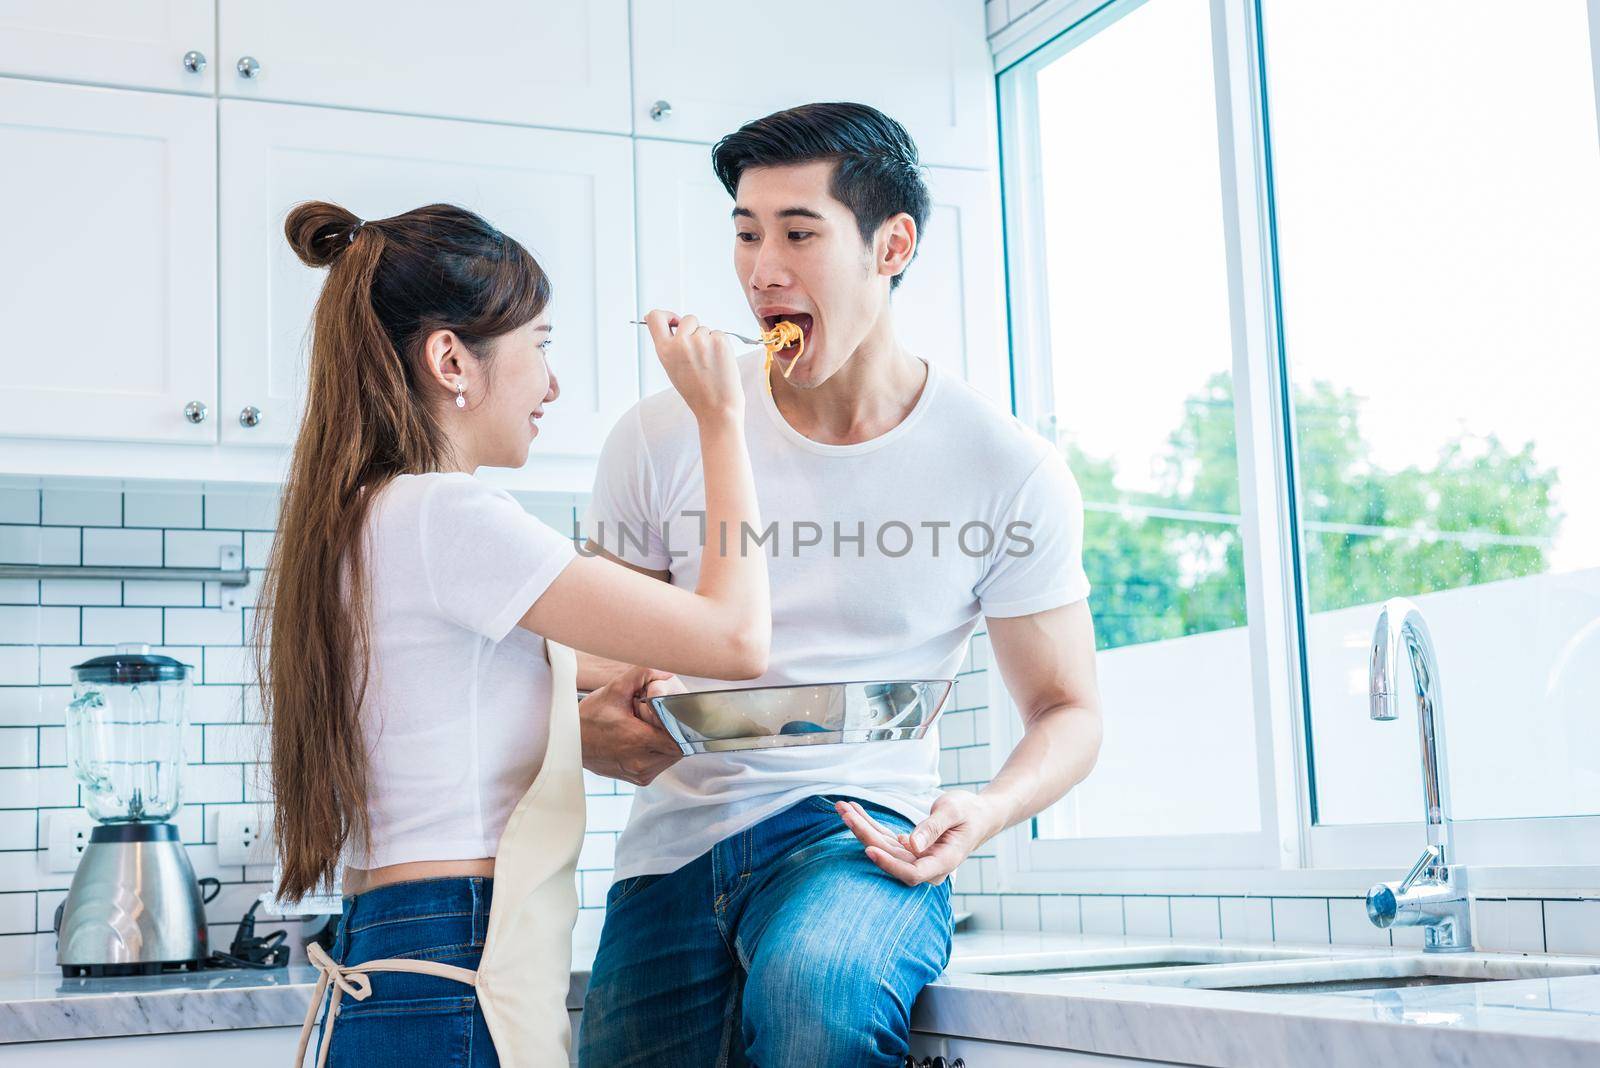 Woman feeding food to man as Lovers or couples in kitchen room. Honeymoon and wedding concept. Cooking theme 